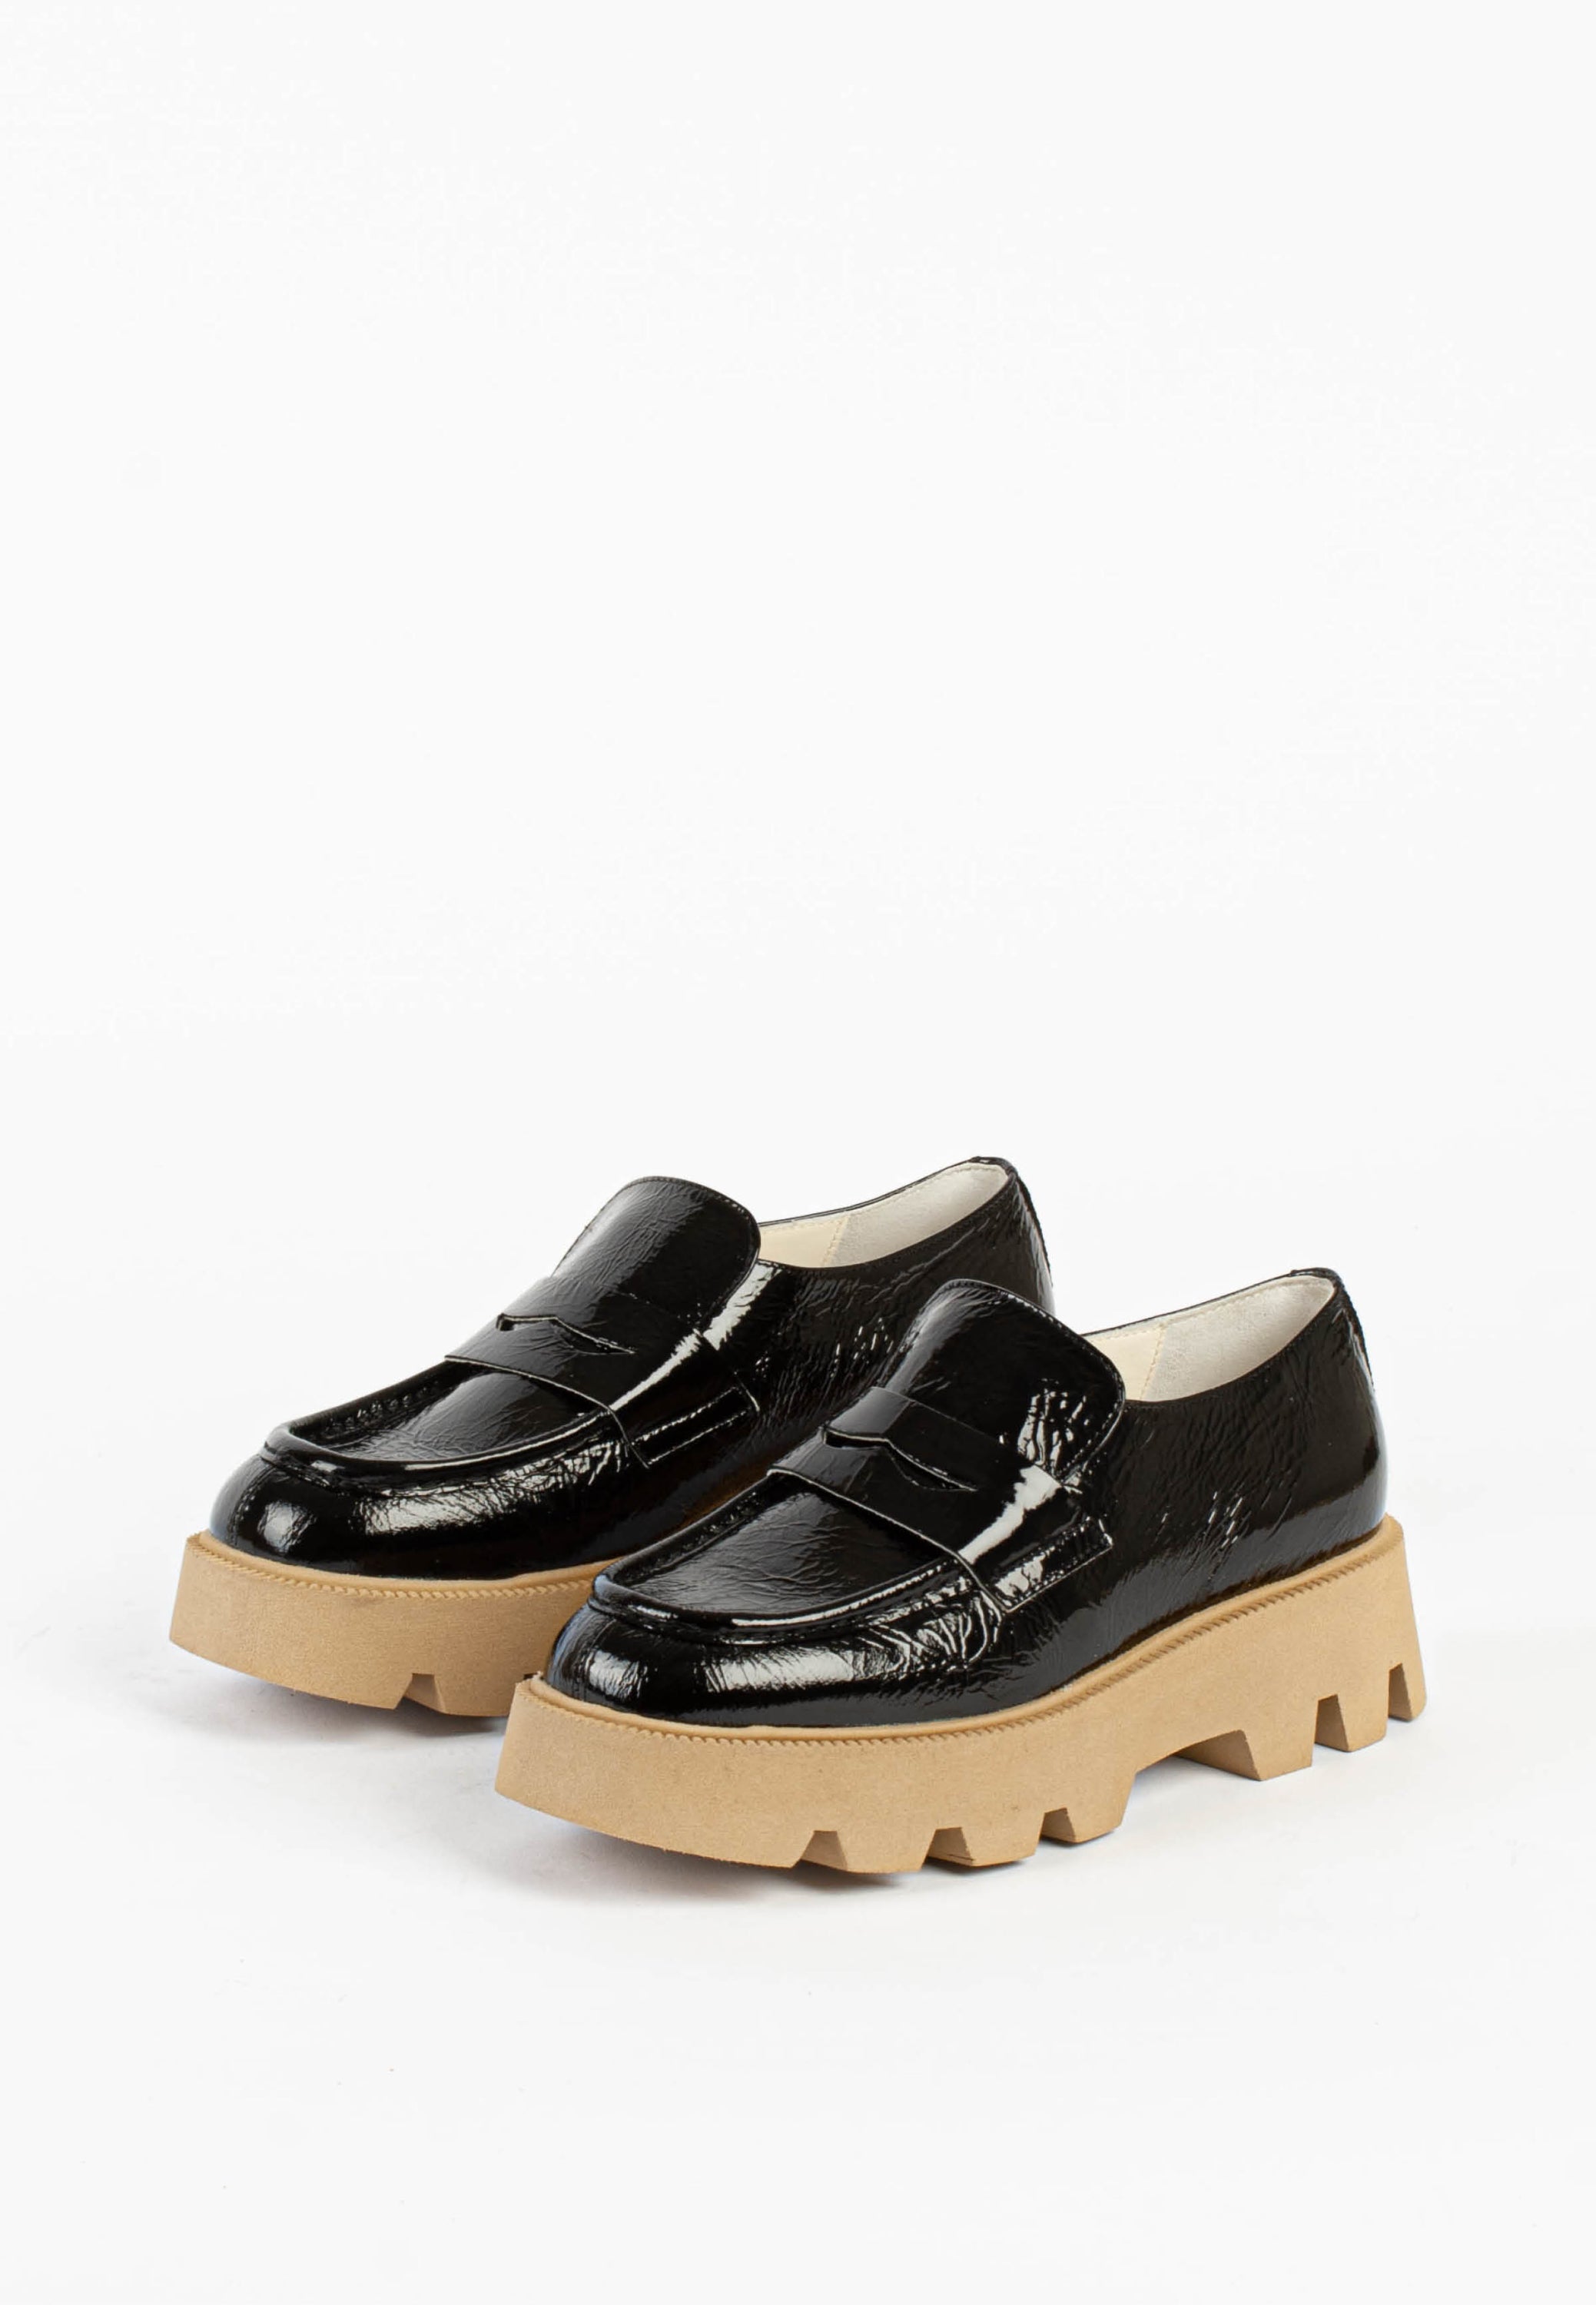 William Black Brown Chunky Loafers WILLIAM-BLK-BWN - 2a